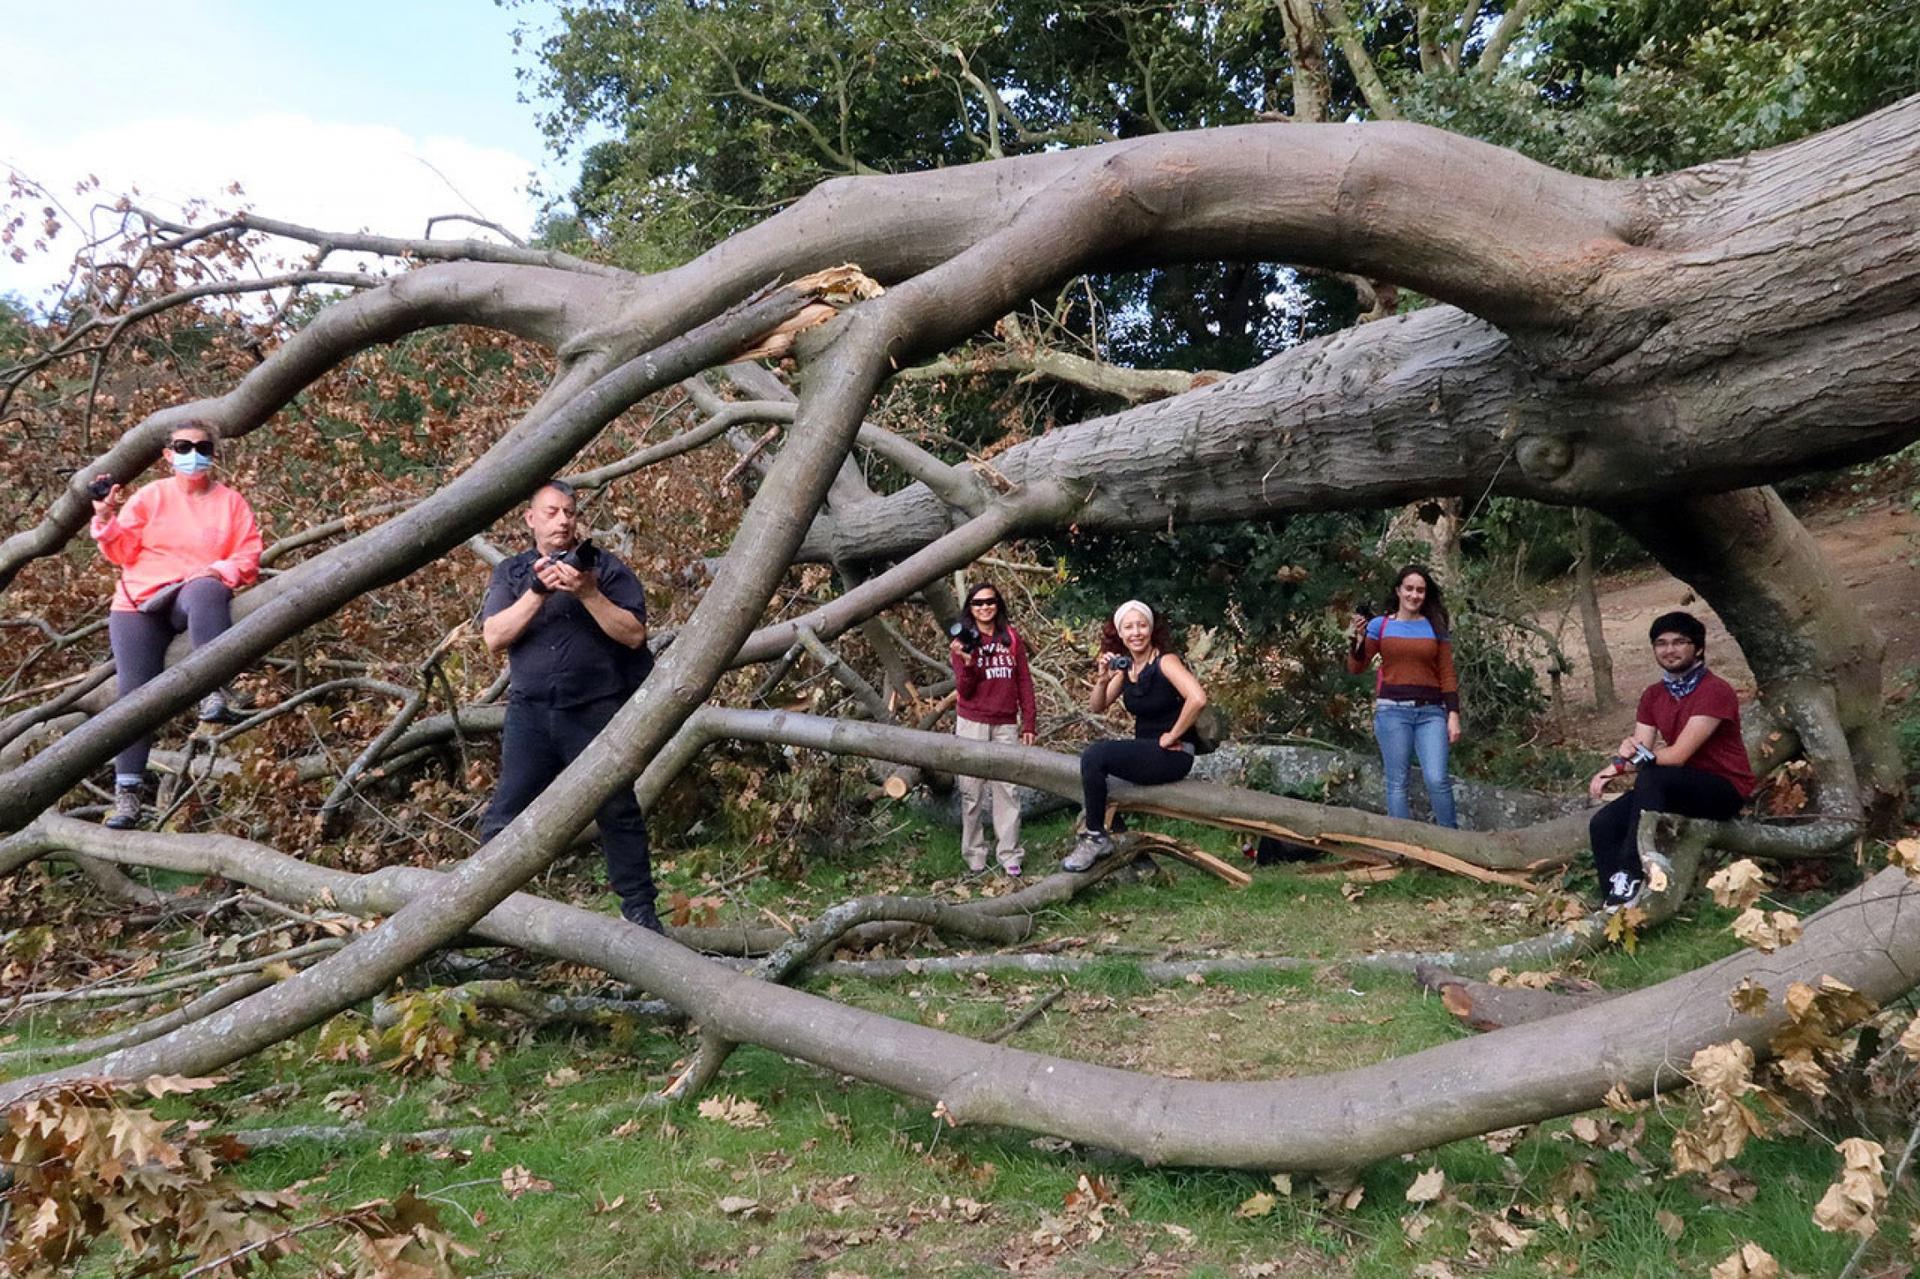 A small group of people are shown standing near or siting on a large tree that has fallen over, each holding a camera.